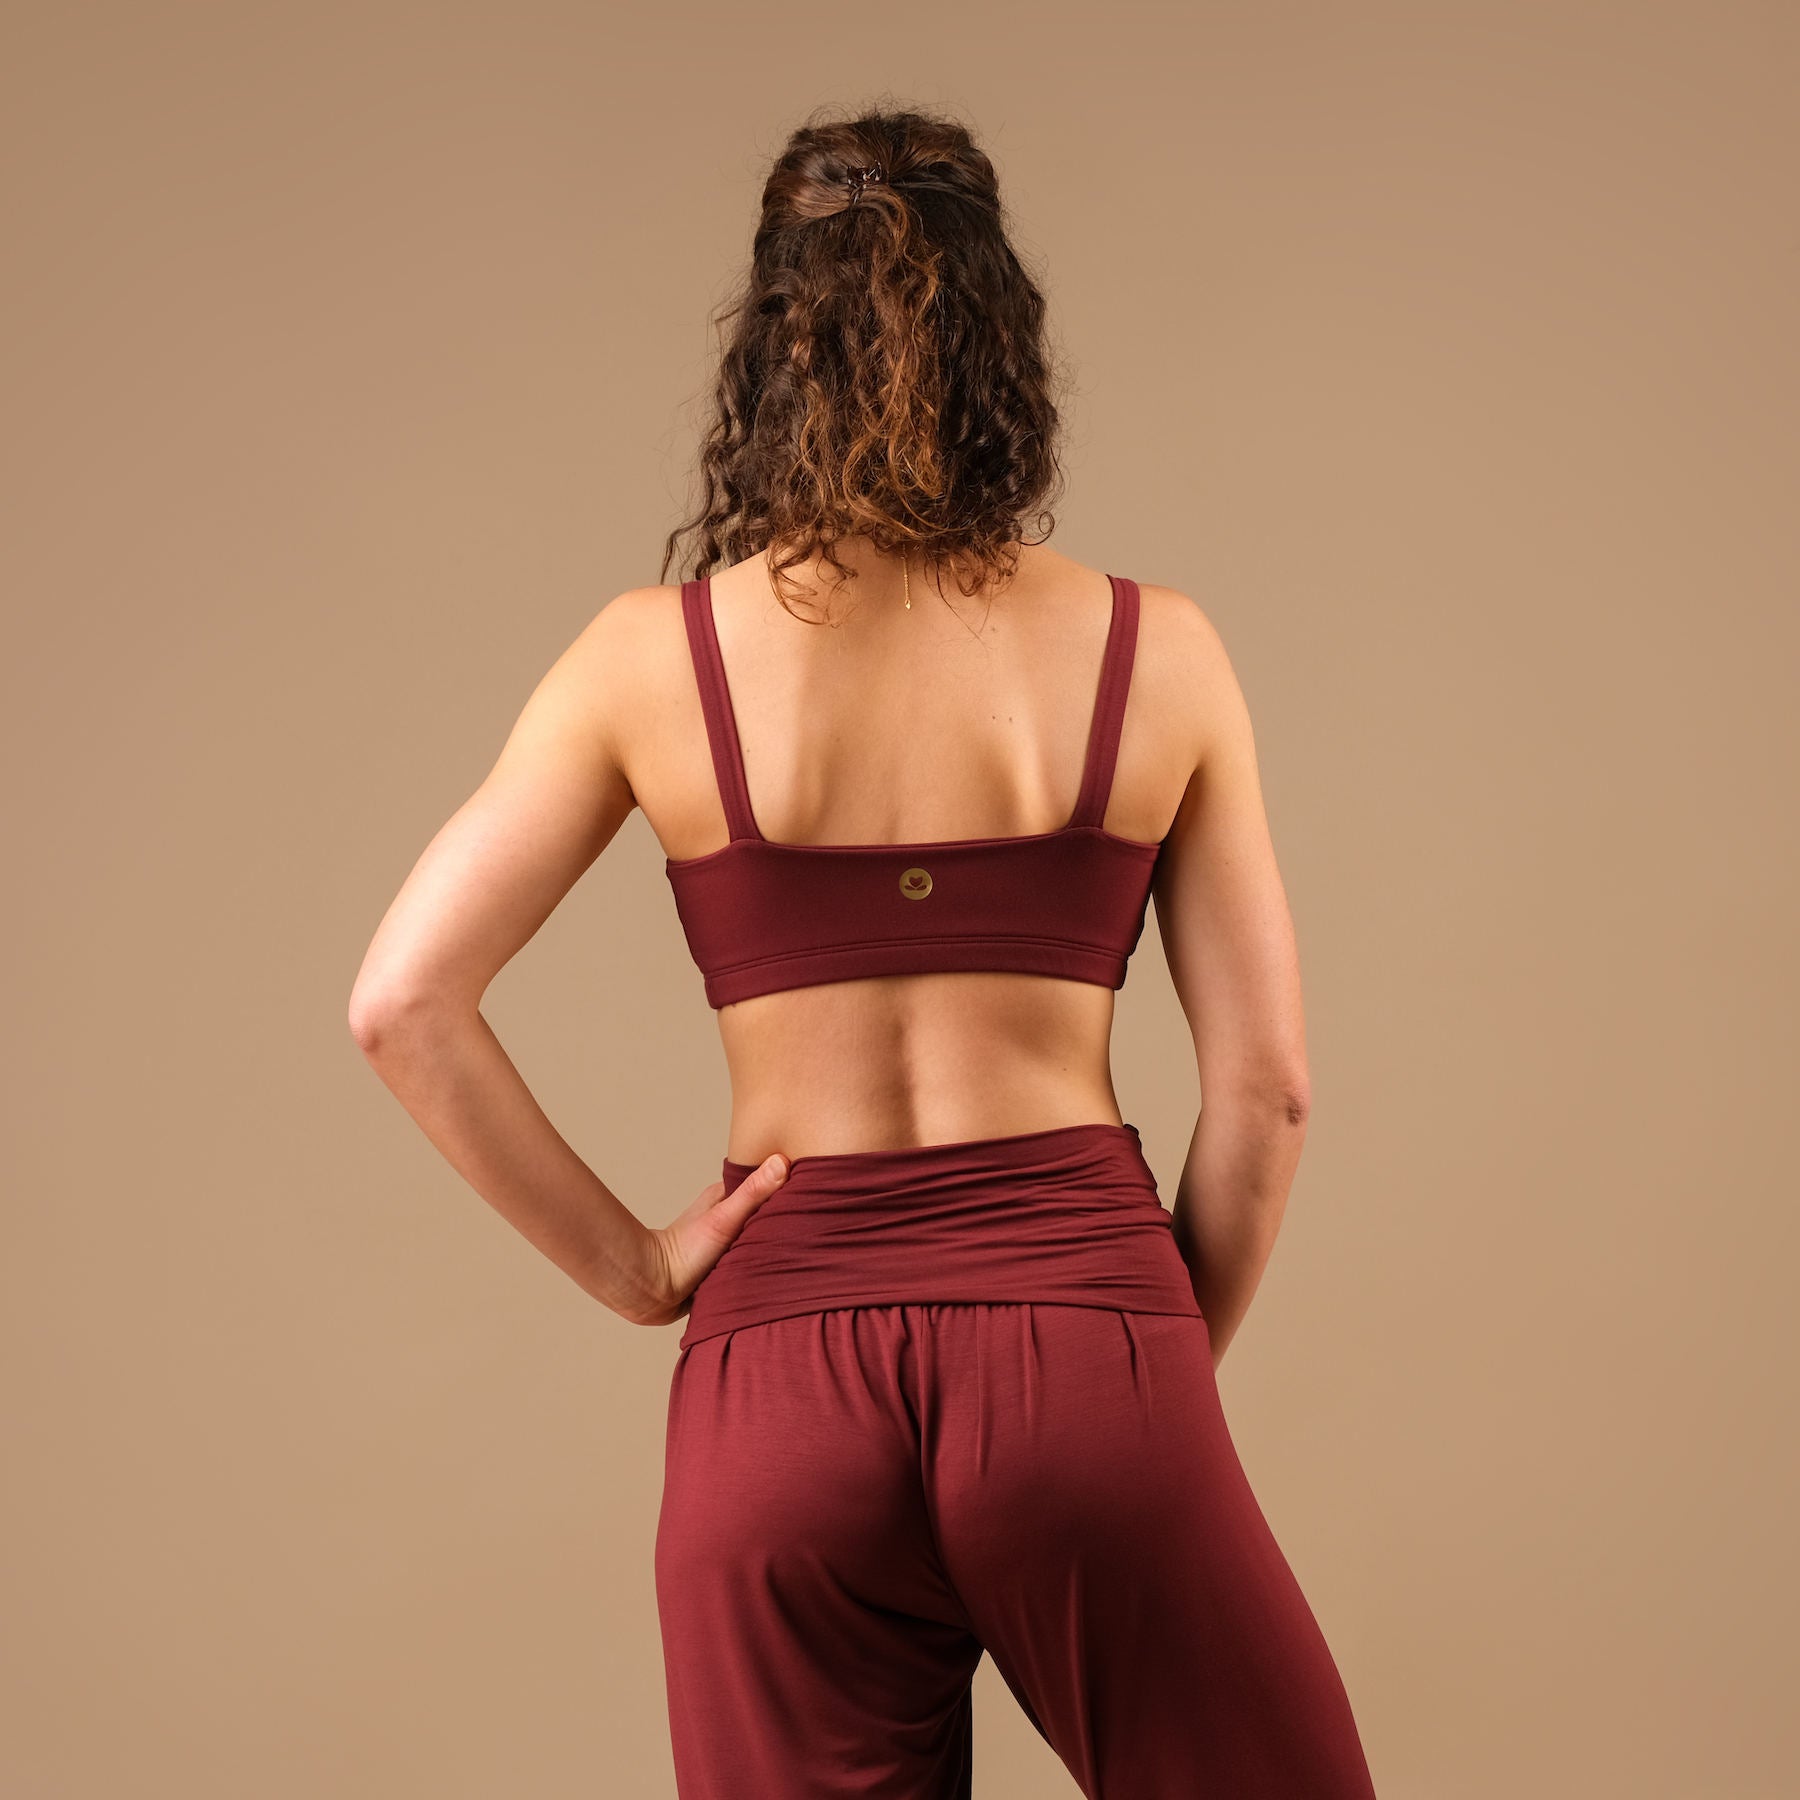 Yoga Bra Comfy bordeaux, durable, made in Switzerland